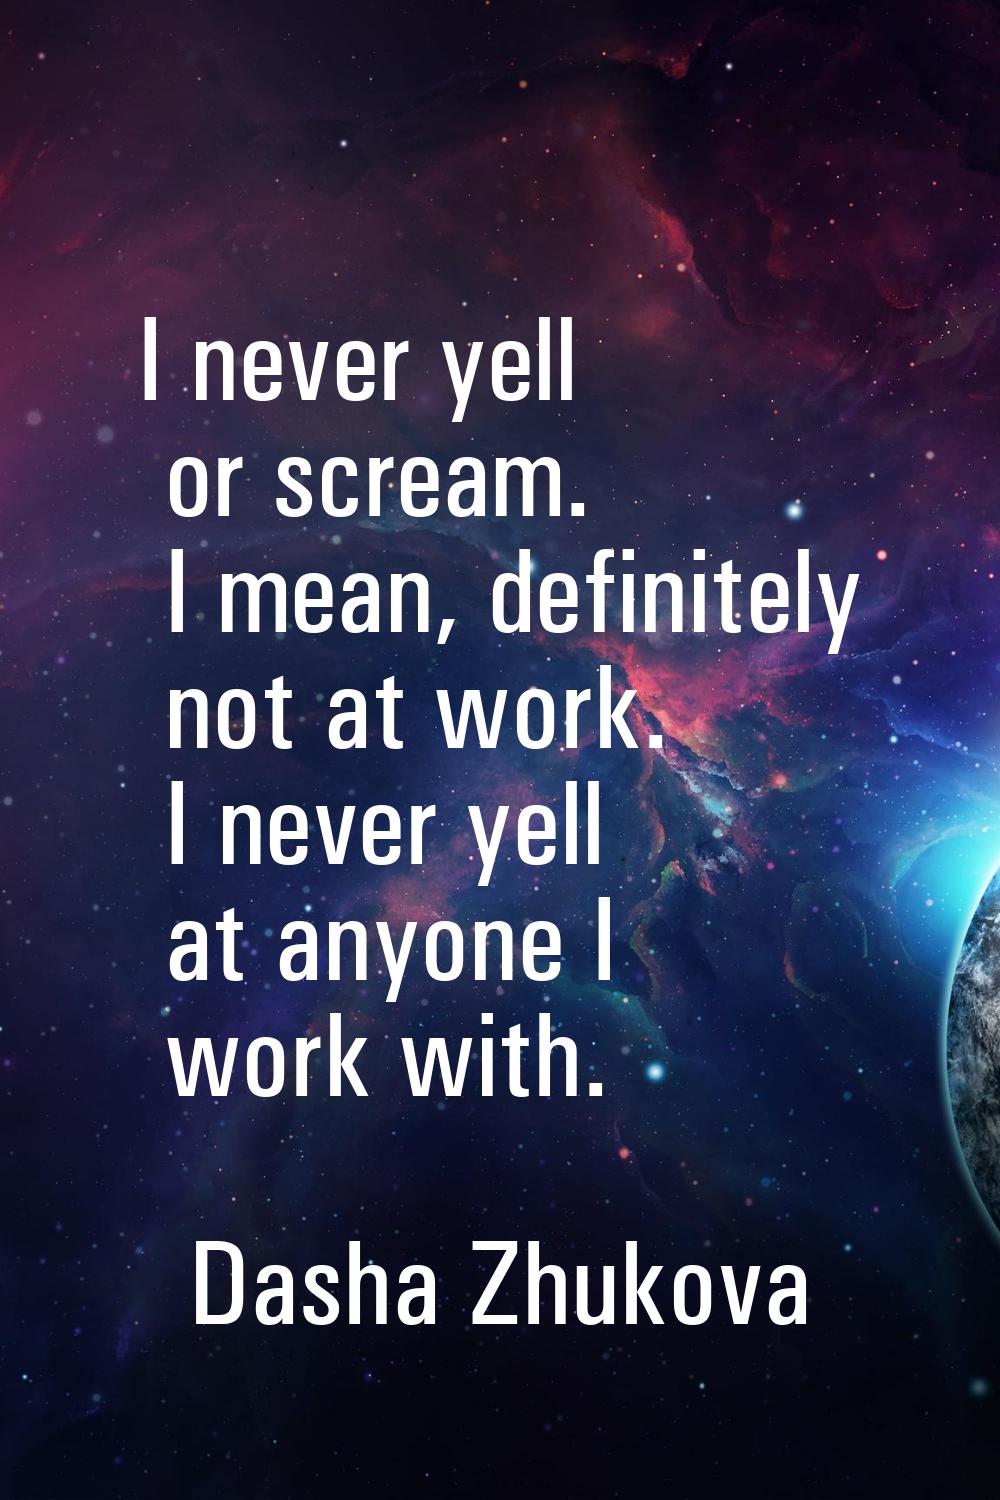 I never yell or scream. I mean, definitely not at work. I never yell at anyone I work with.